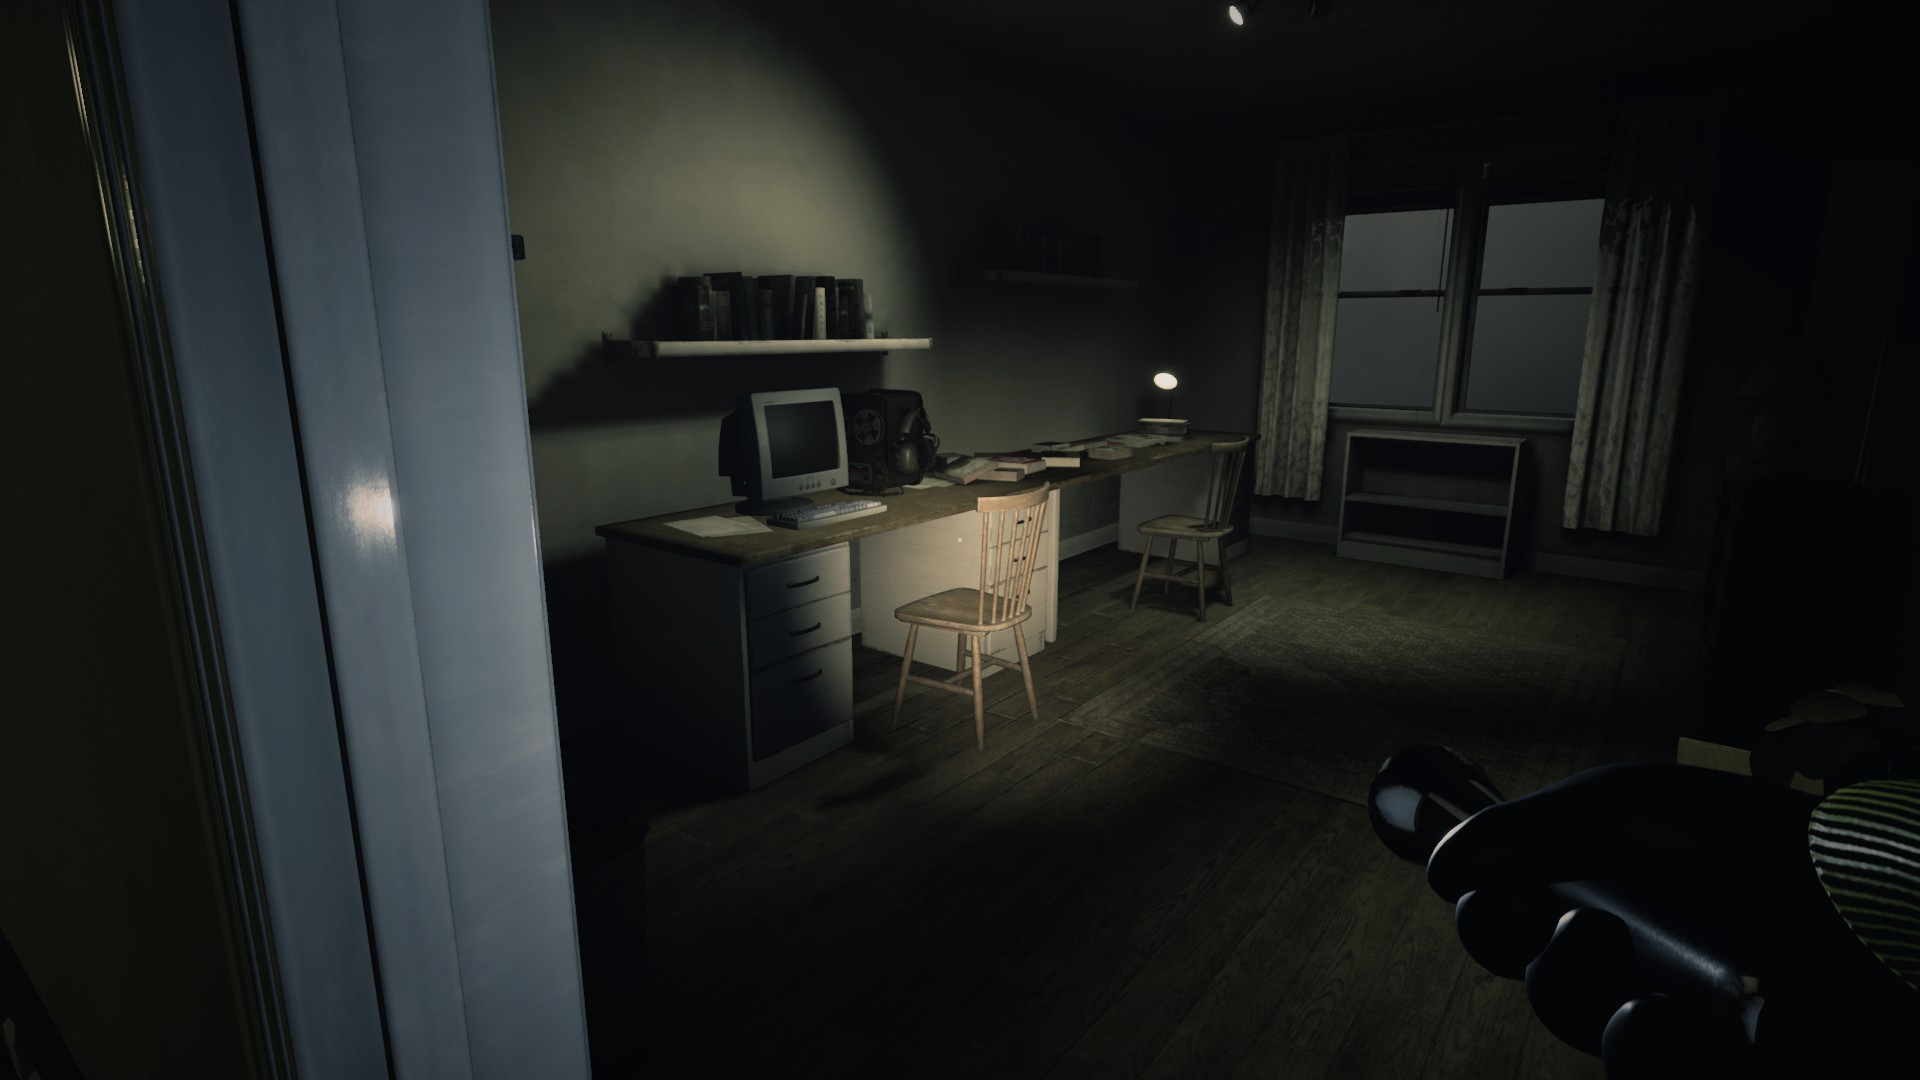 Escape The Backrooms UPDATE 3 Walkthrough, Guide, Gameplay, and More - News